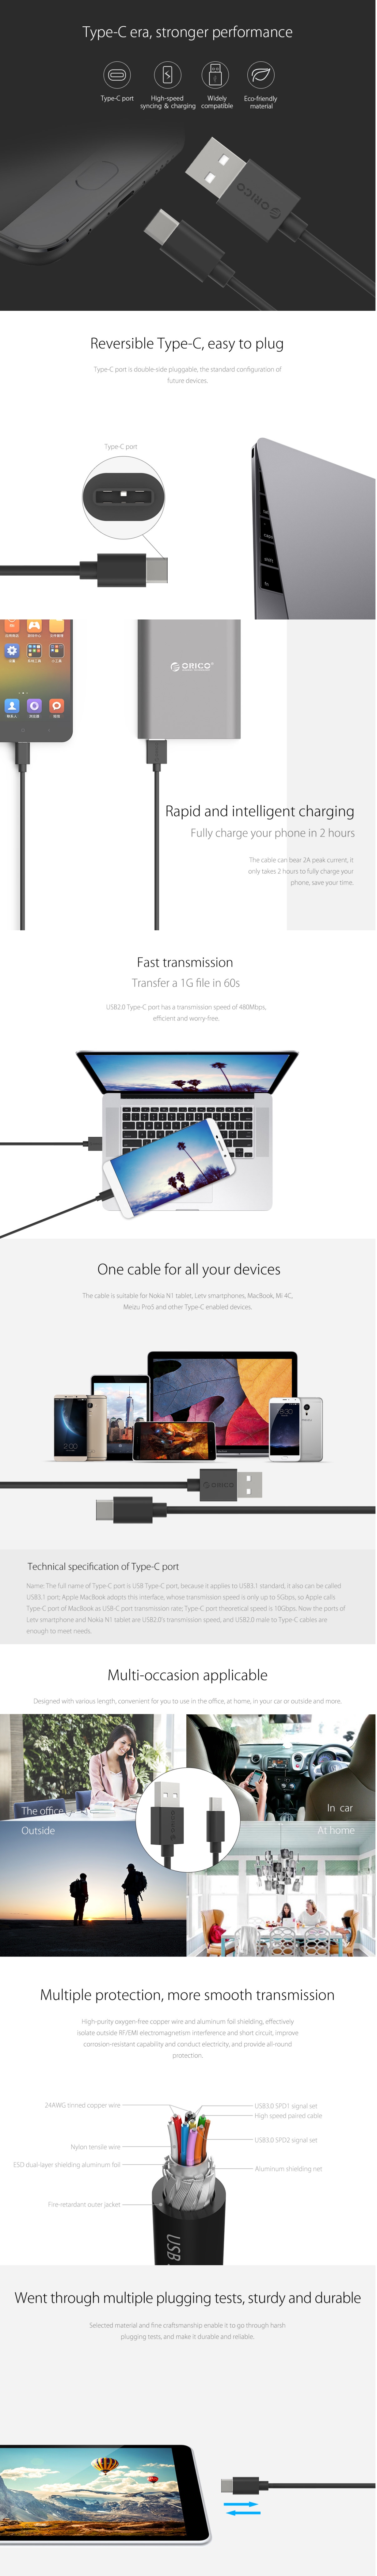 A large marketing image providing additional information about the product ORICO USB Type-A to Type-C Charging Data Cable 1m White - Additional alt info not provided